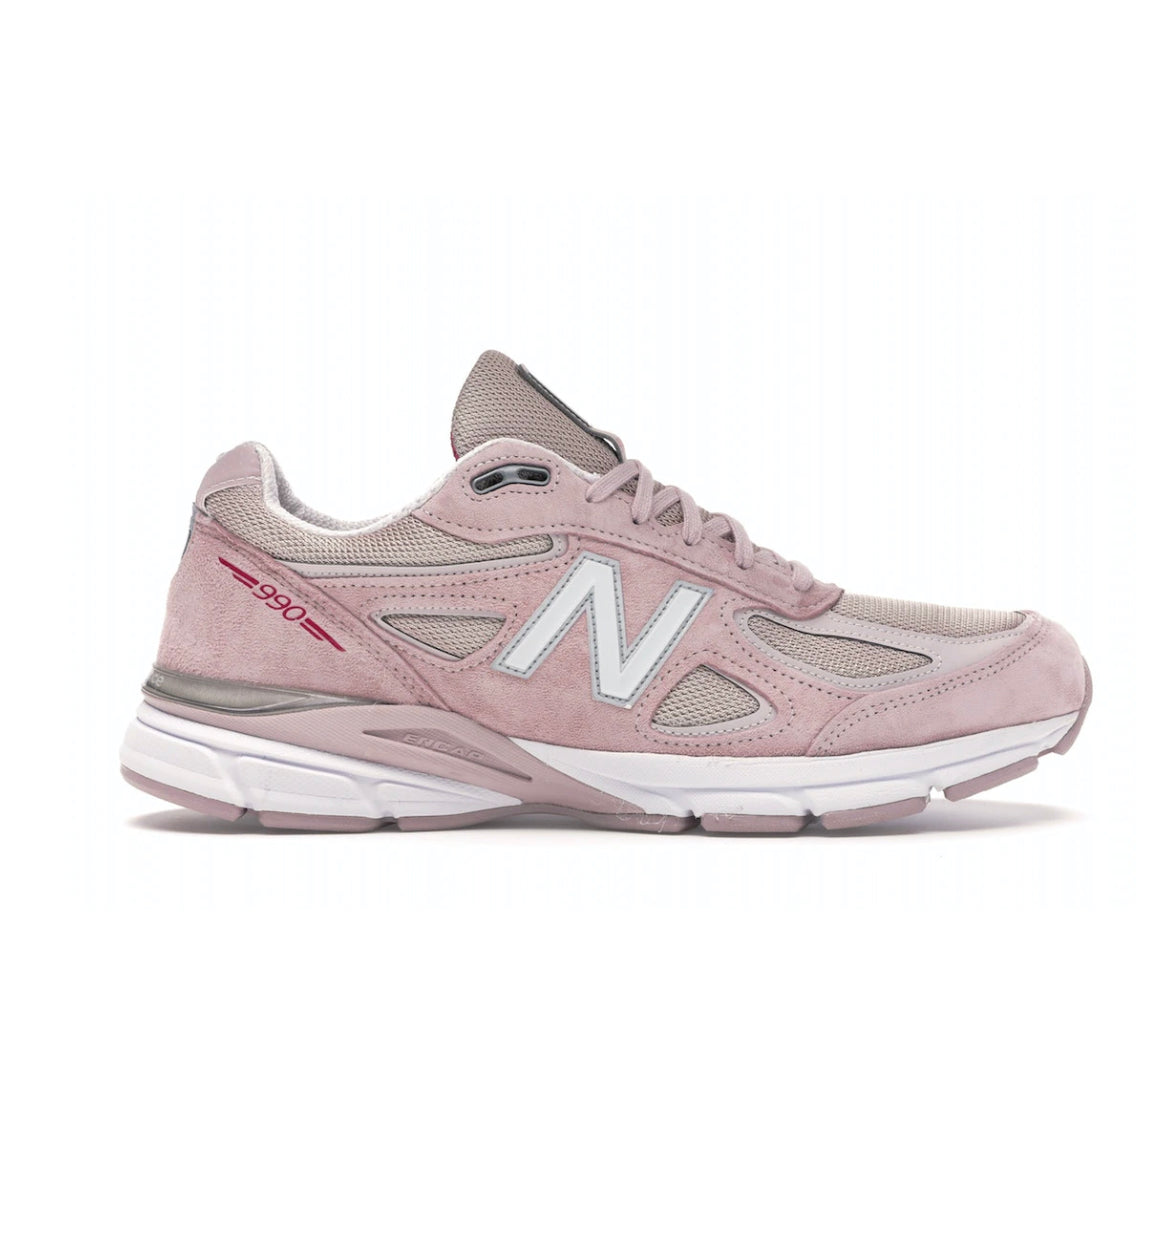 NB 990v4 Made in USA ‘Pink Ribbon Faded Rose’ M990KMN4 (gently used - no box)